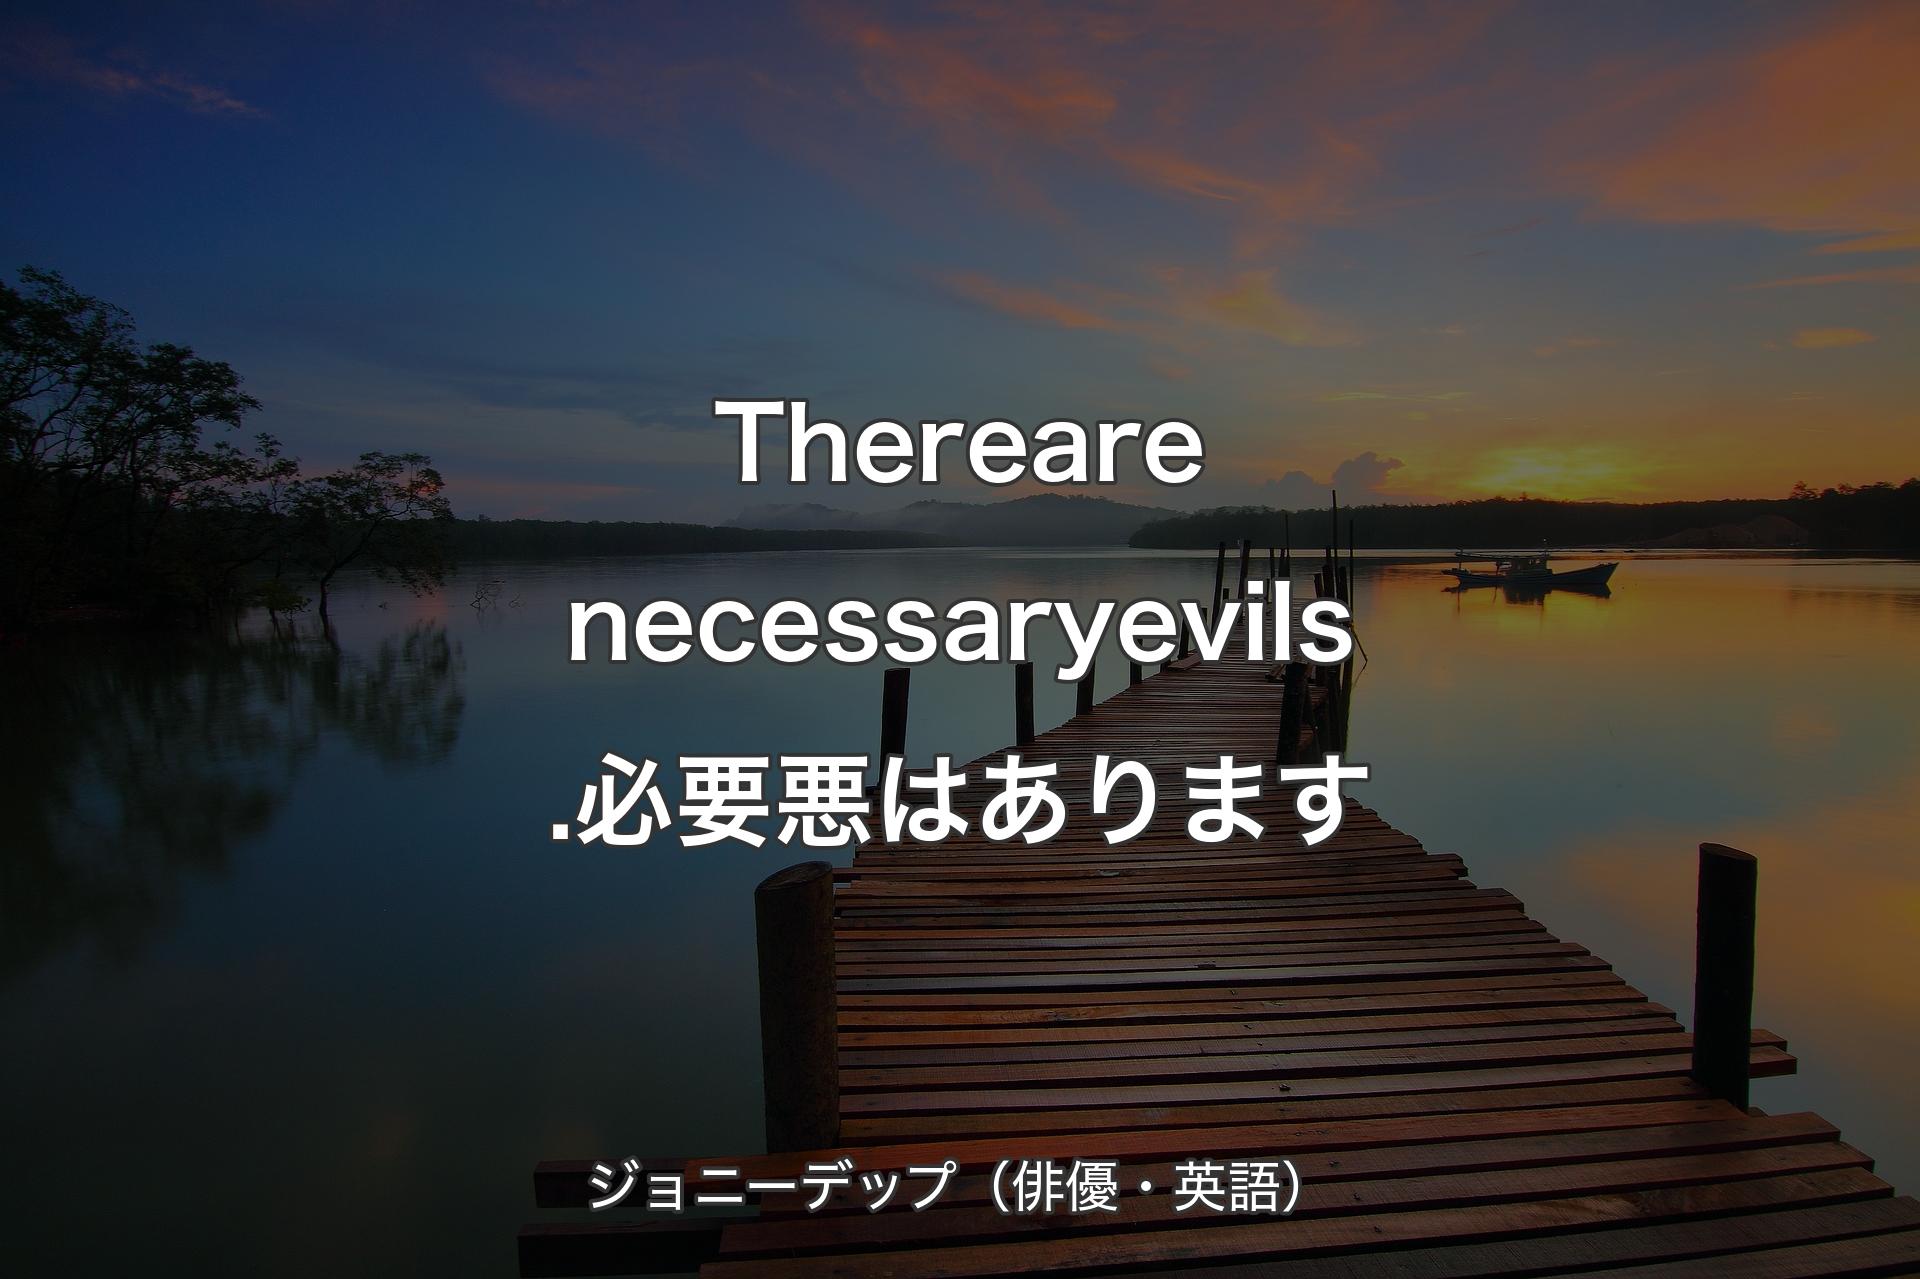 There are necessary evils.必要悪はあります - ジョニーデップ（俳優・英語）